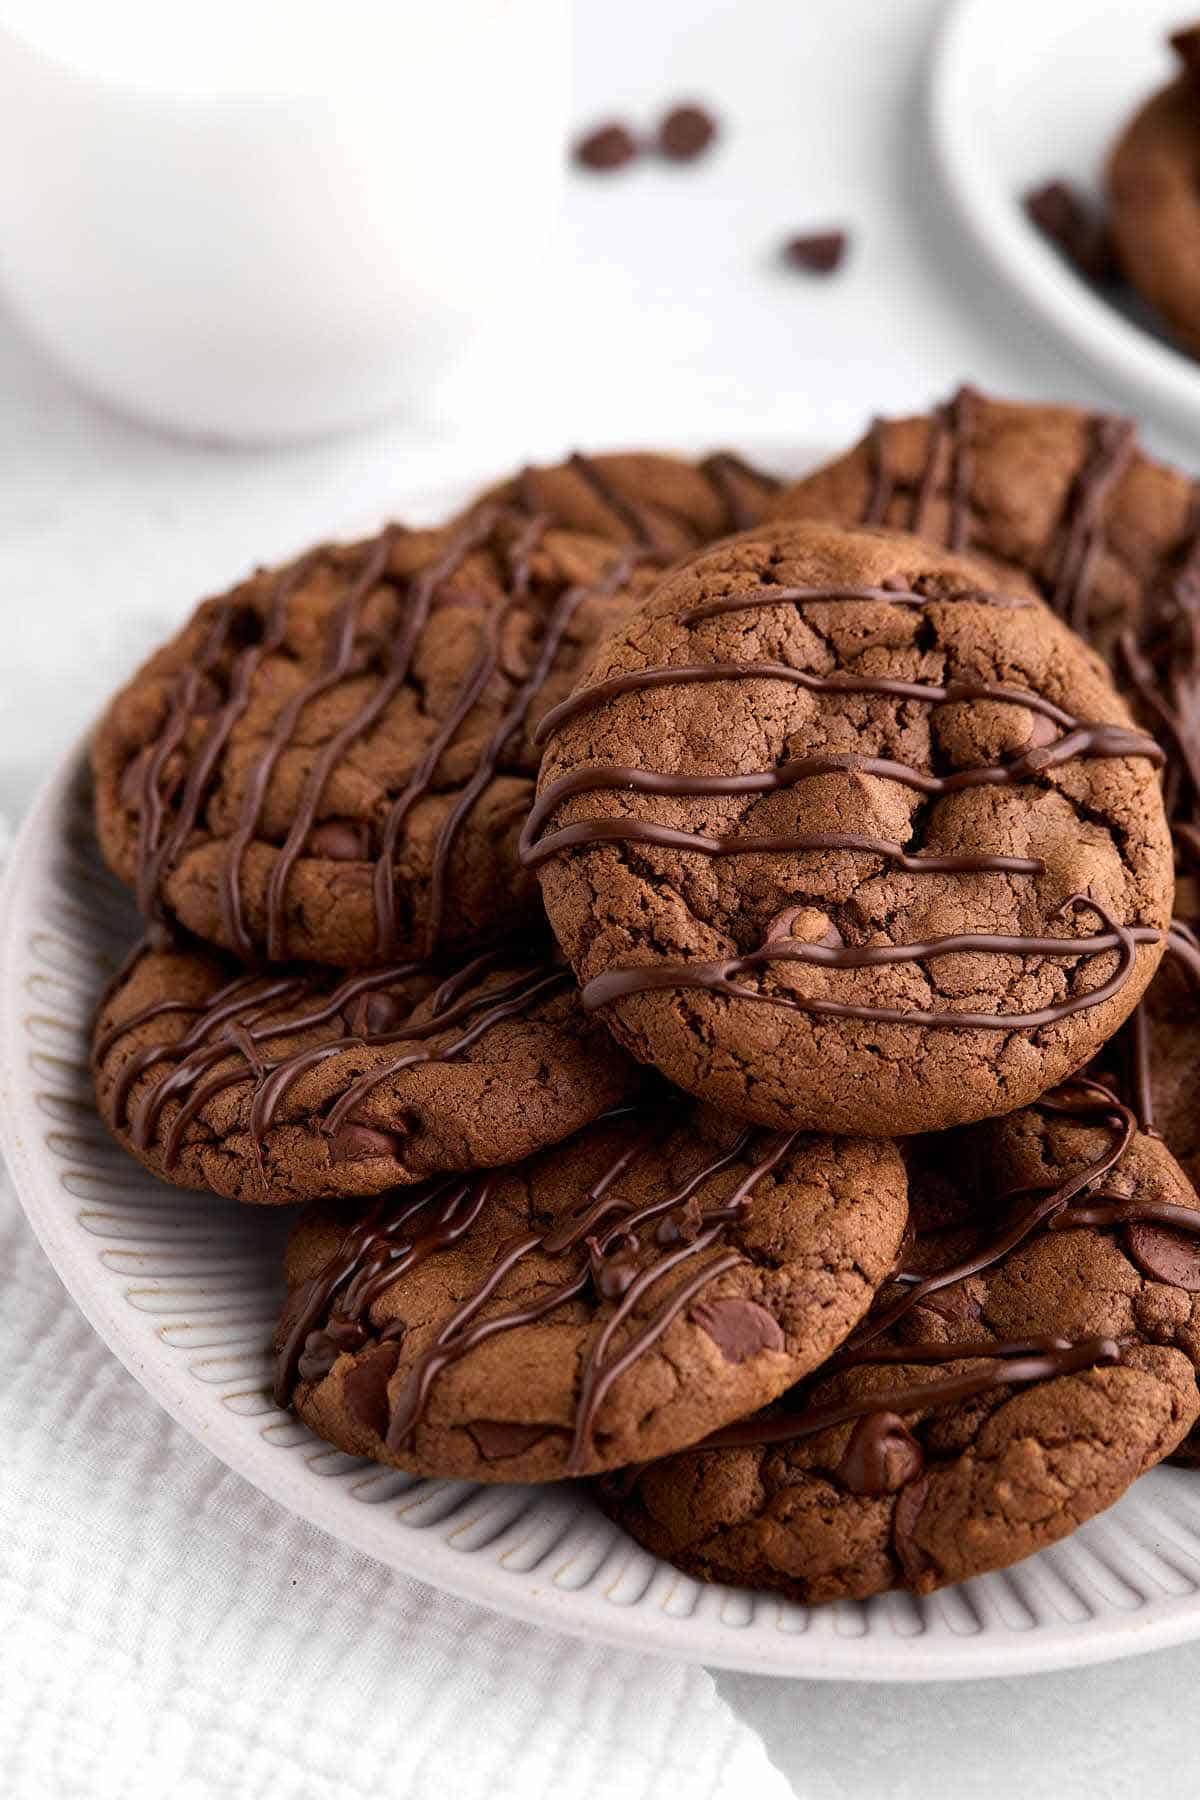 Overhead view of a plate of devil's food chocolate chip cookies.